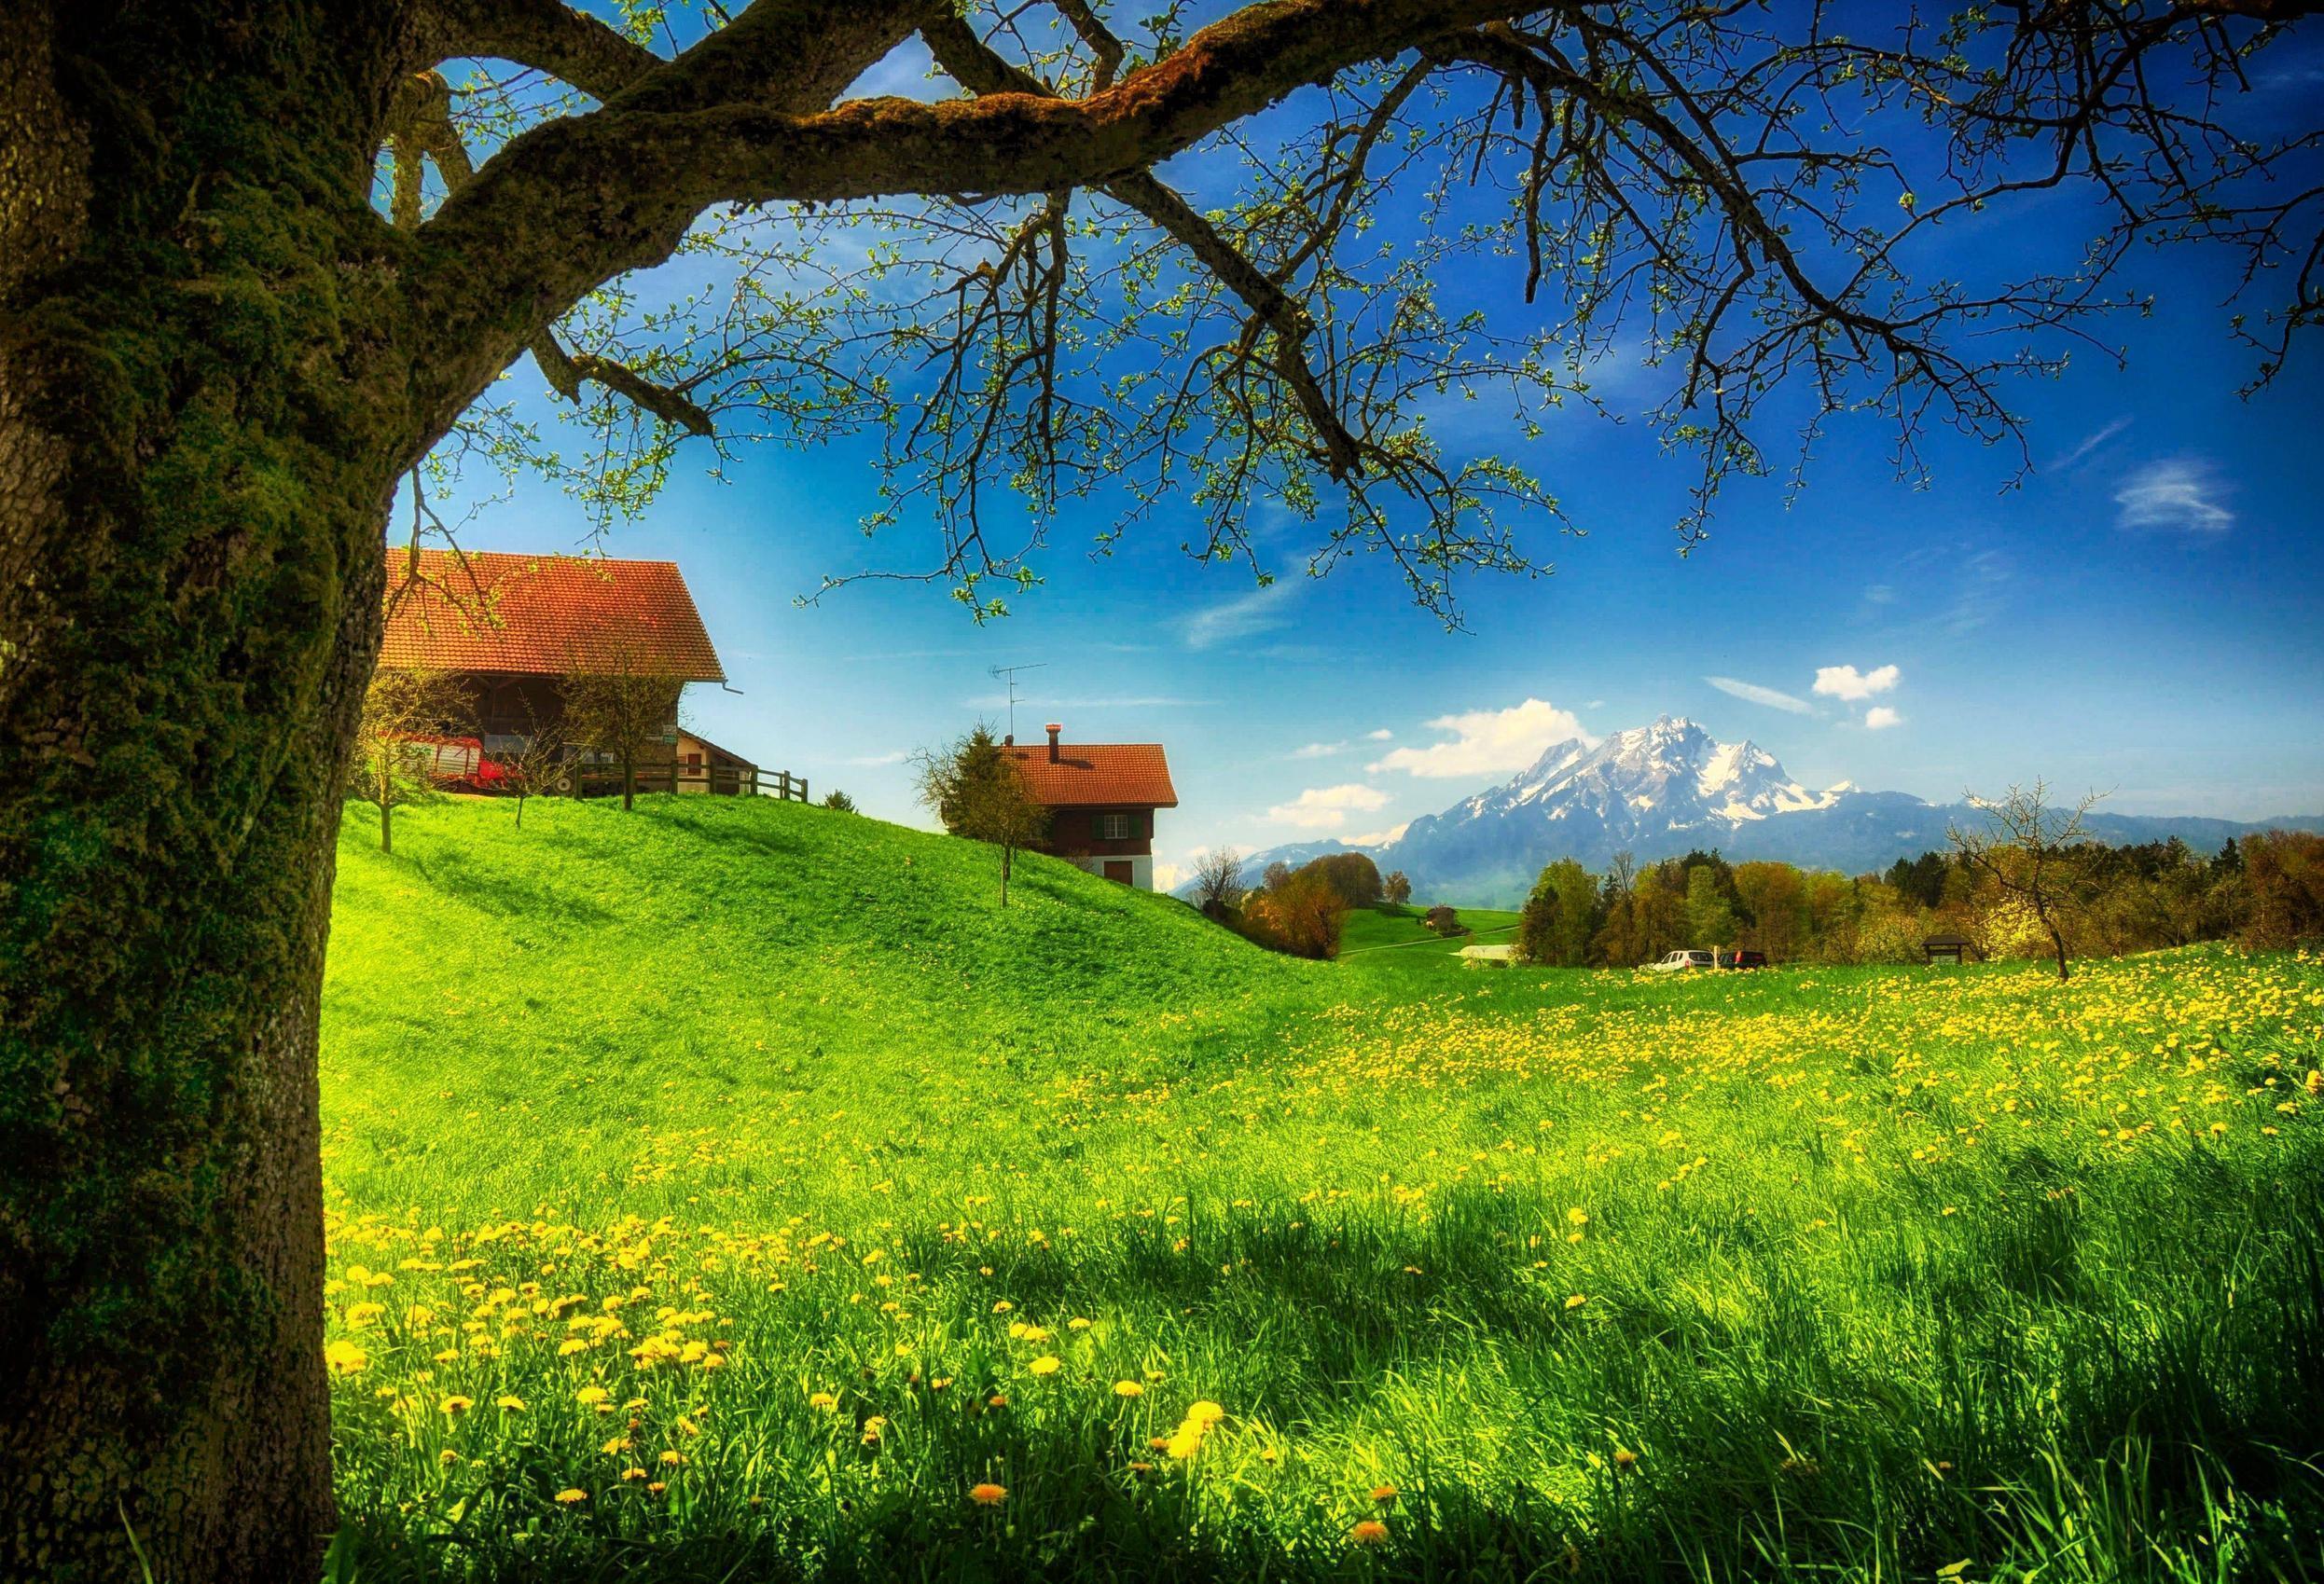 Spring meadow in the village wallpaper and image